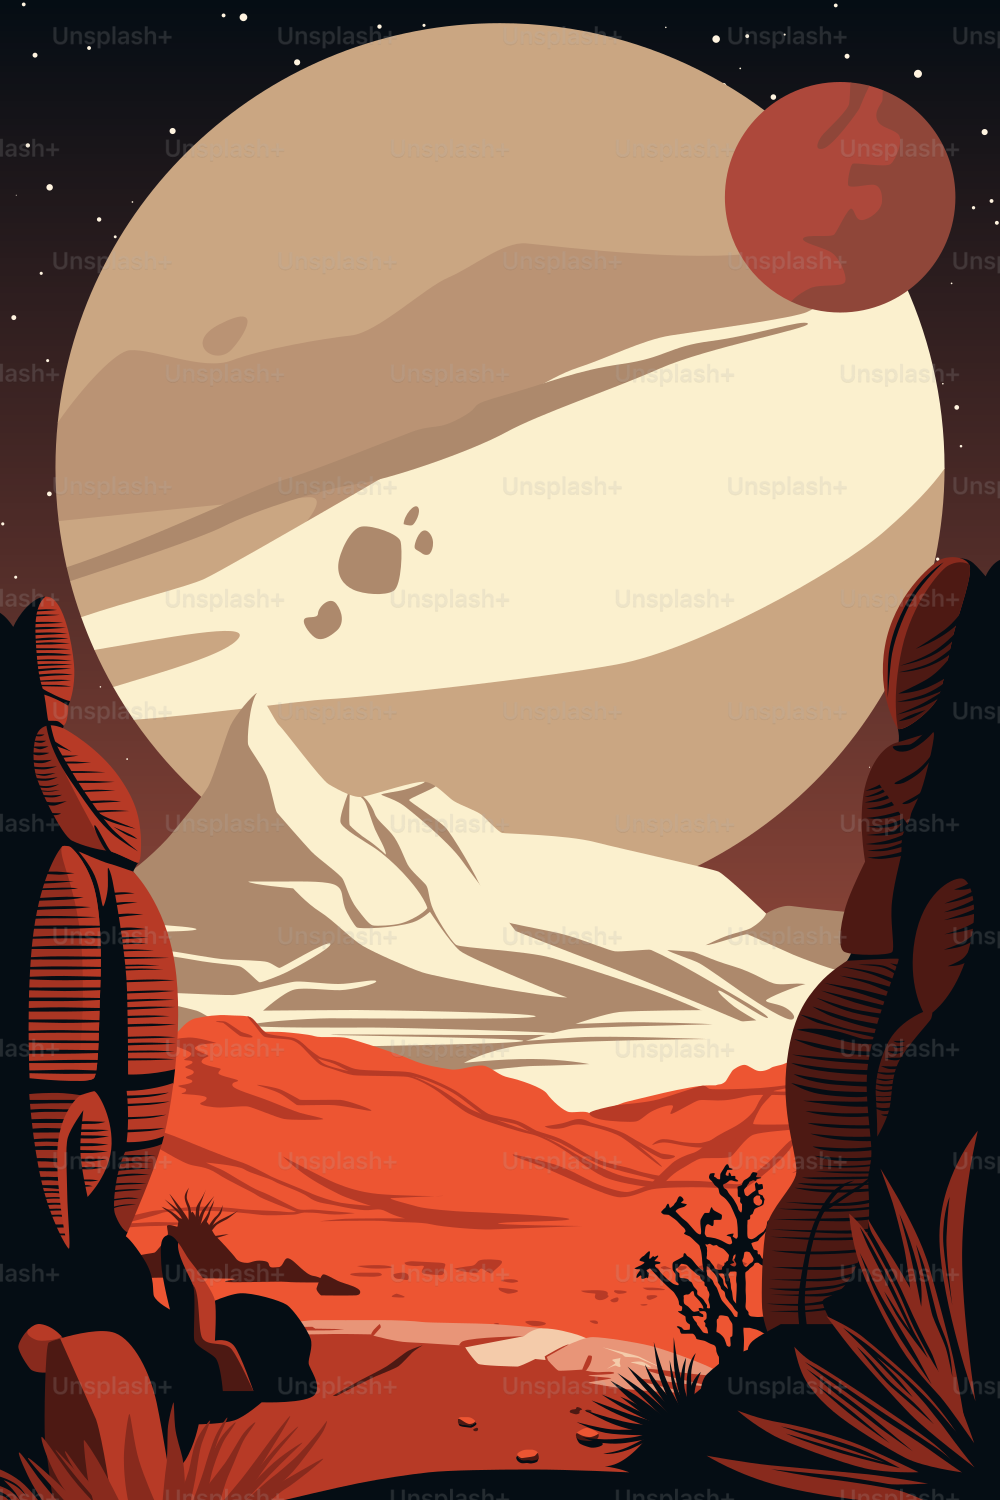 Space  Poster.  Landscape of Distant Unfamiliar Red Planet Out There. Dark Skies with a Huge Moon and an Asteroid. Stars of New Galaxies.